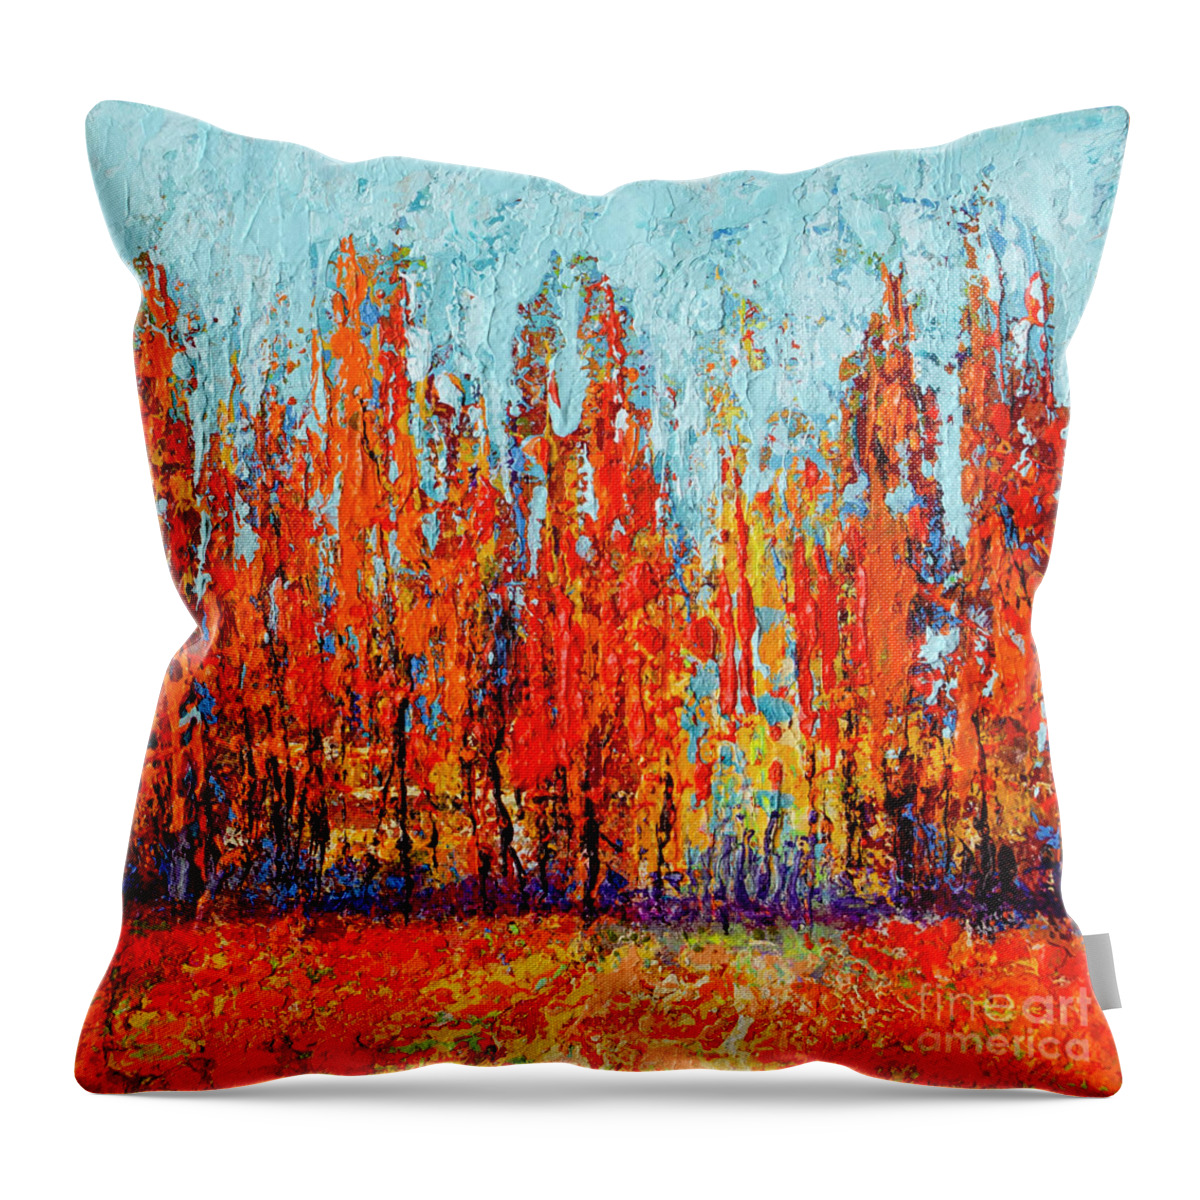 Redwood Forest Paintings In The Fall Throw Pillow featuring the painting Forest Painting in the Fall - Autumn Season by Patricia Awapara